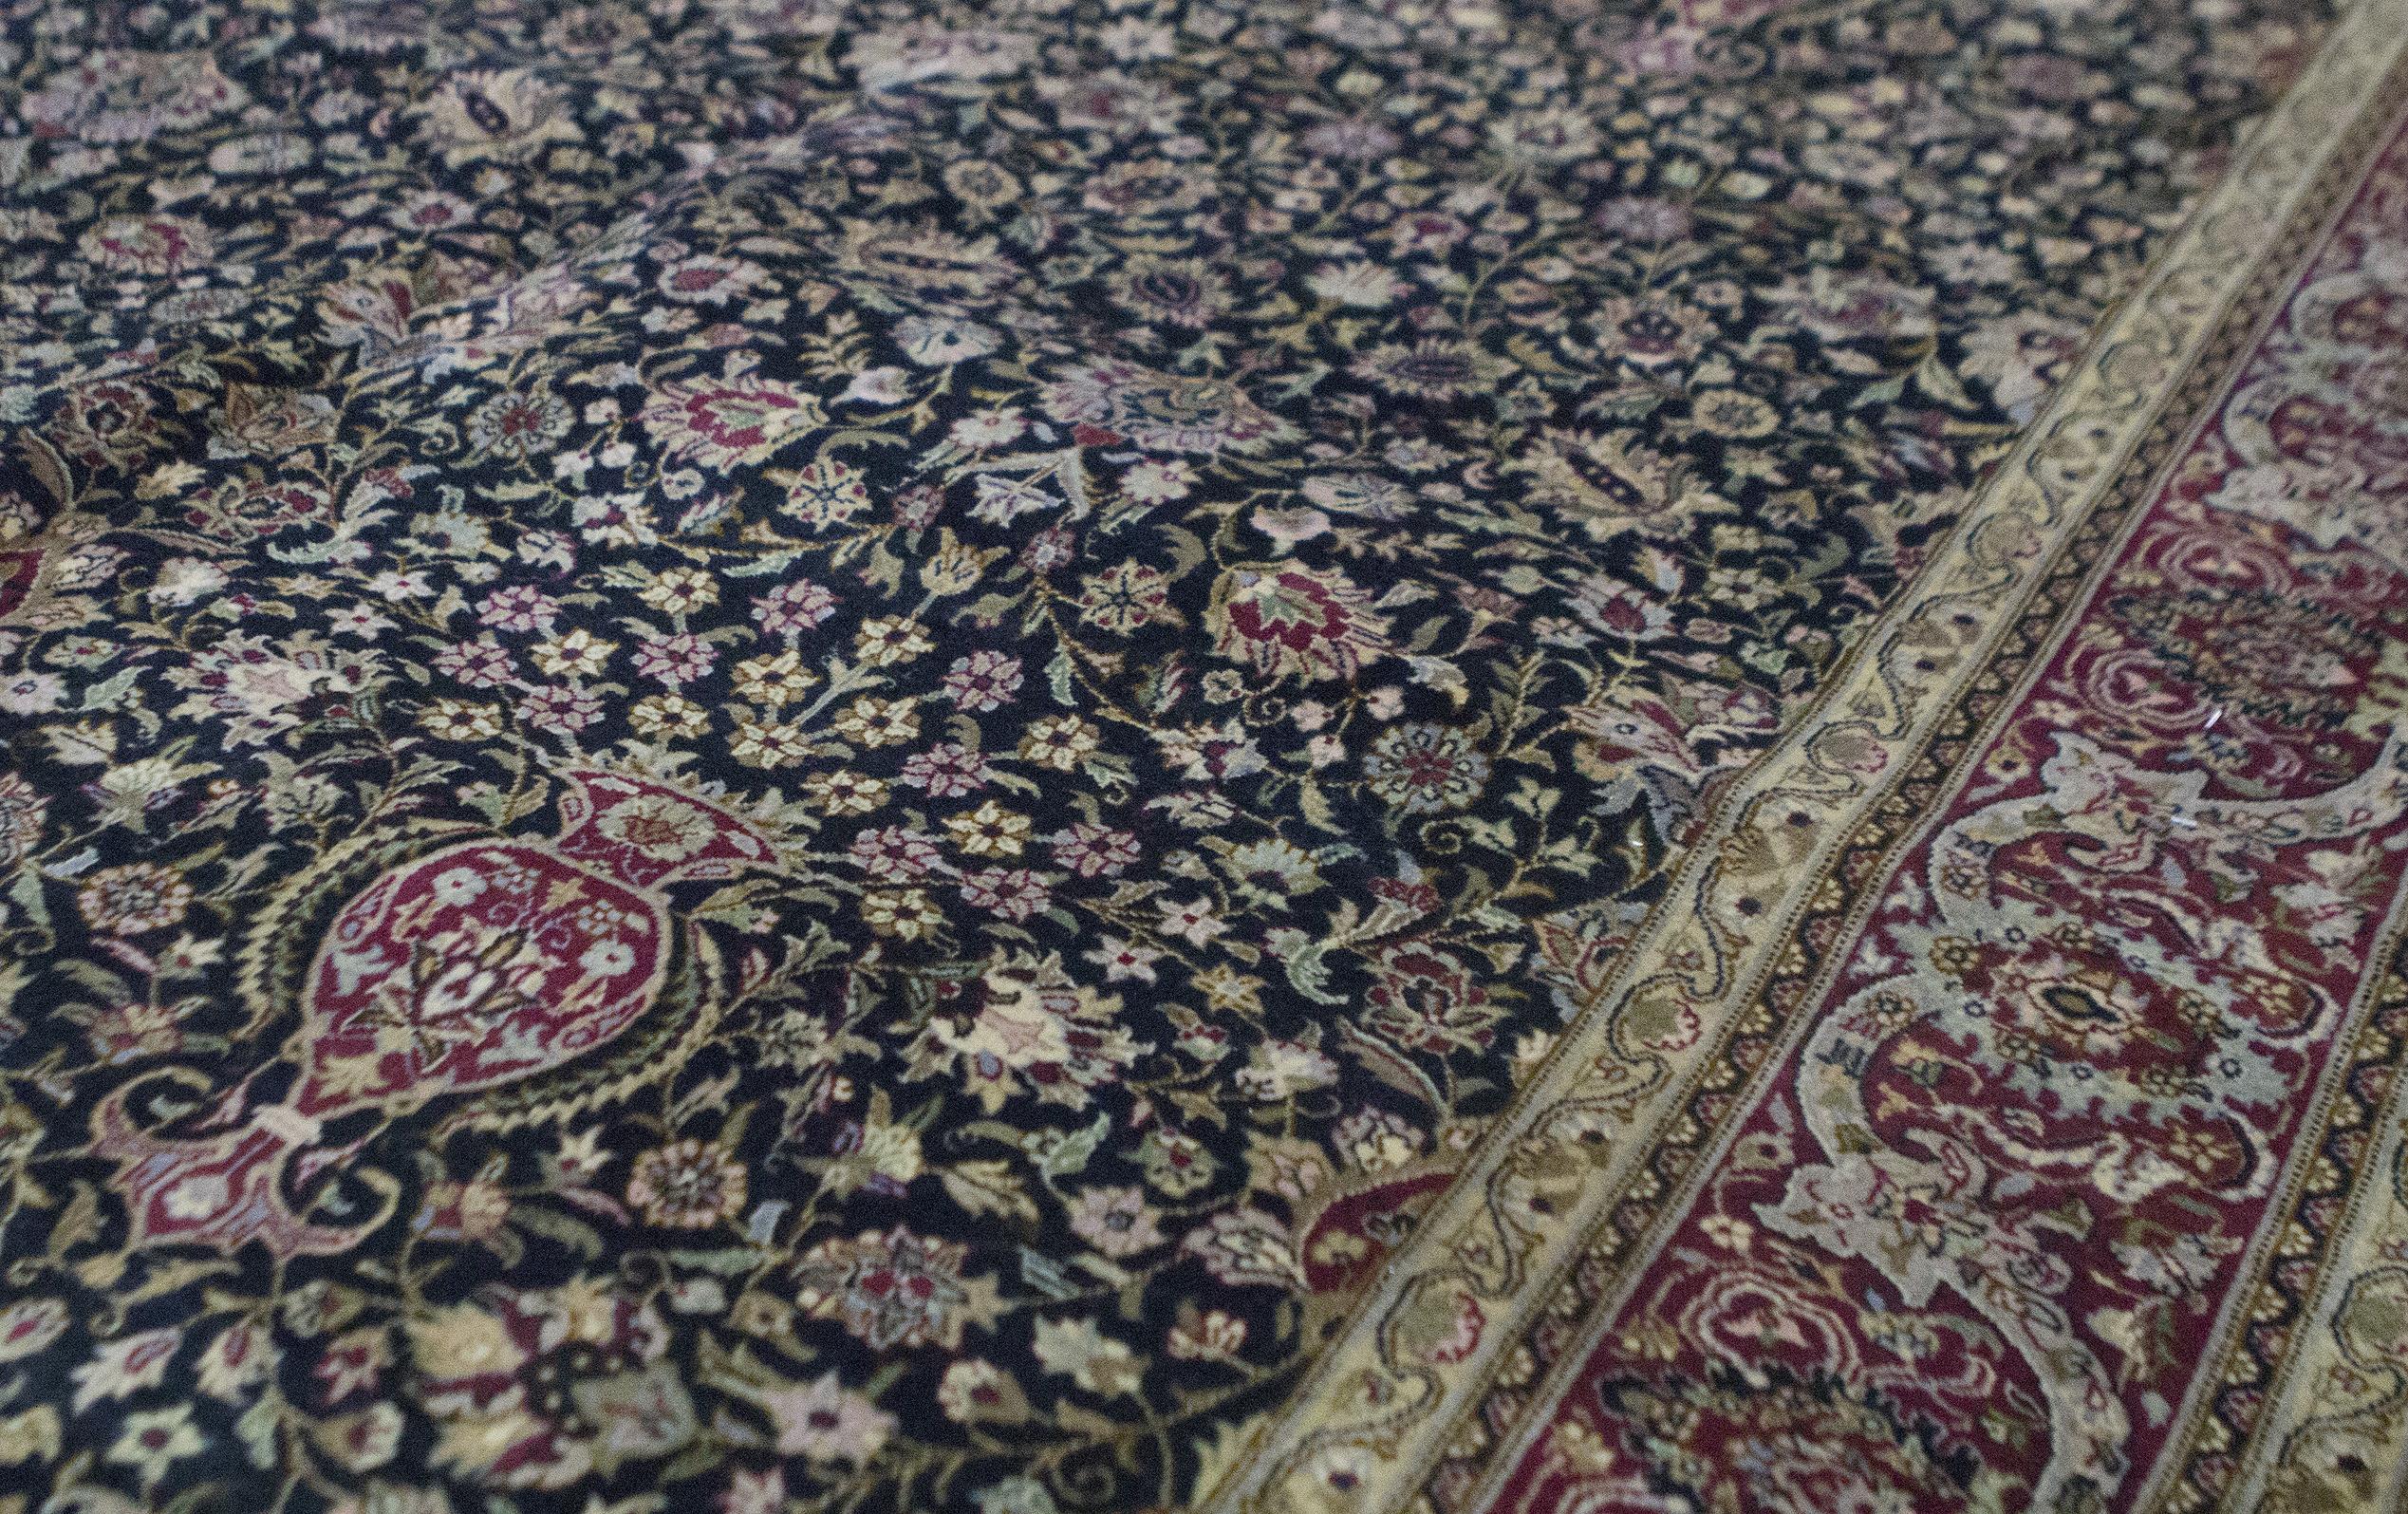 This elegantly handwoven rug is from Pakistan and woven from the finest wool to create a soft and luxurious piece that will work well in so many different settings. Measures: 6' x 8'-11